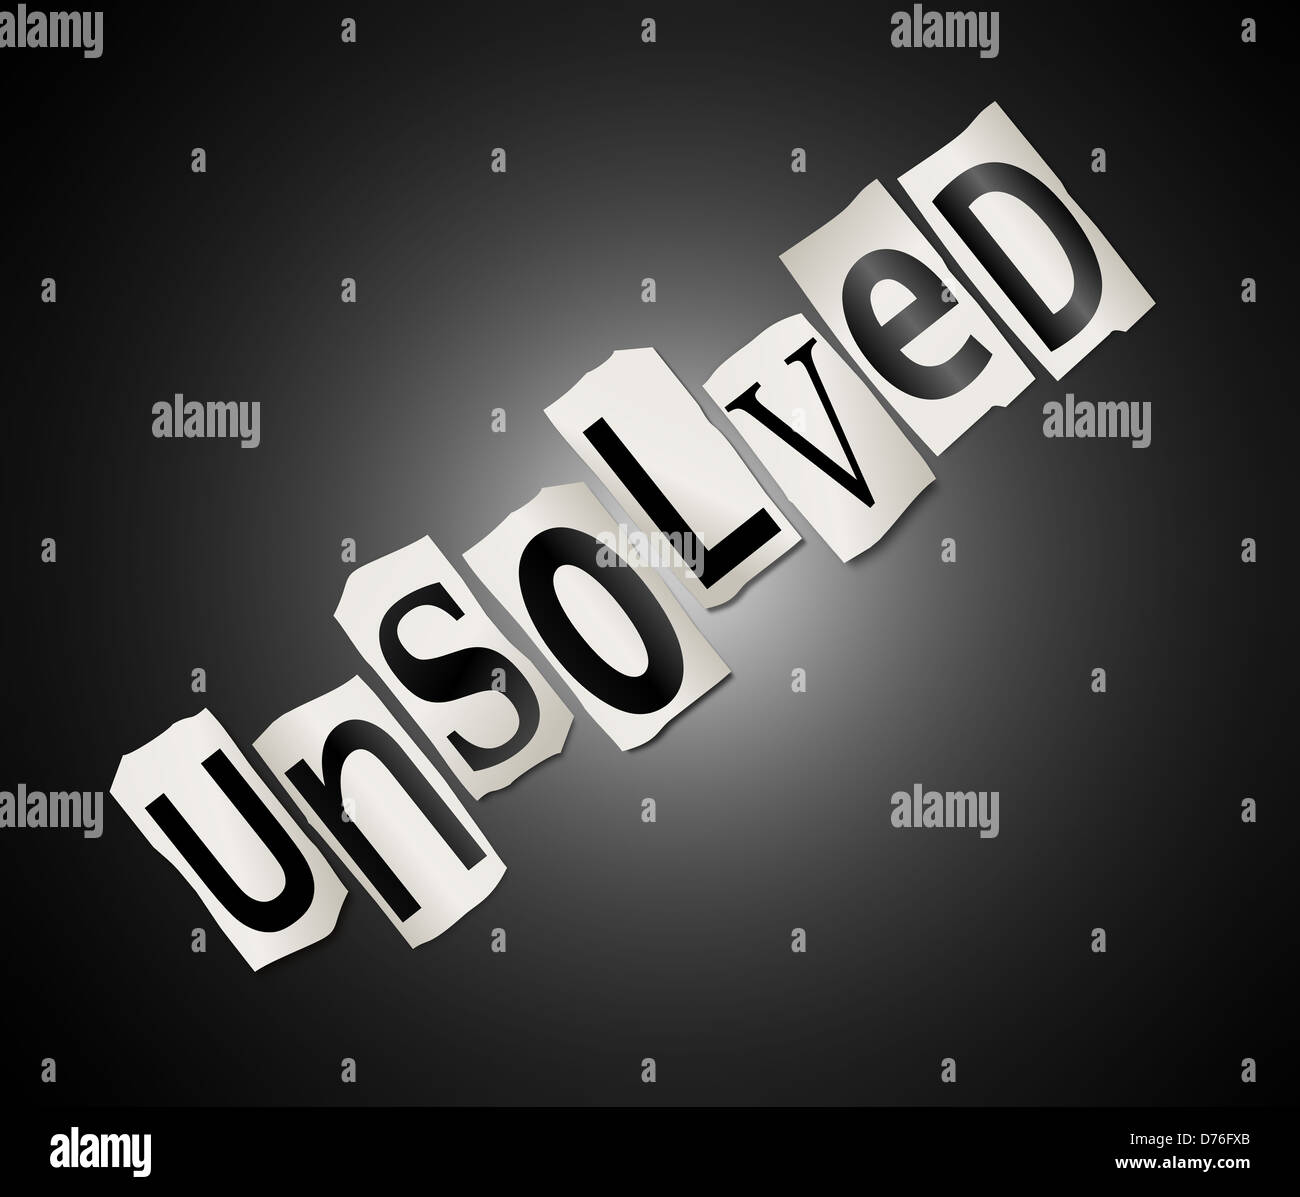 unsolved. Stock Photo